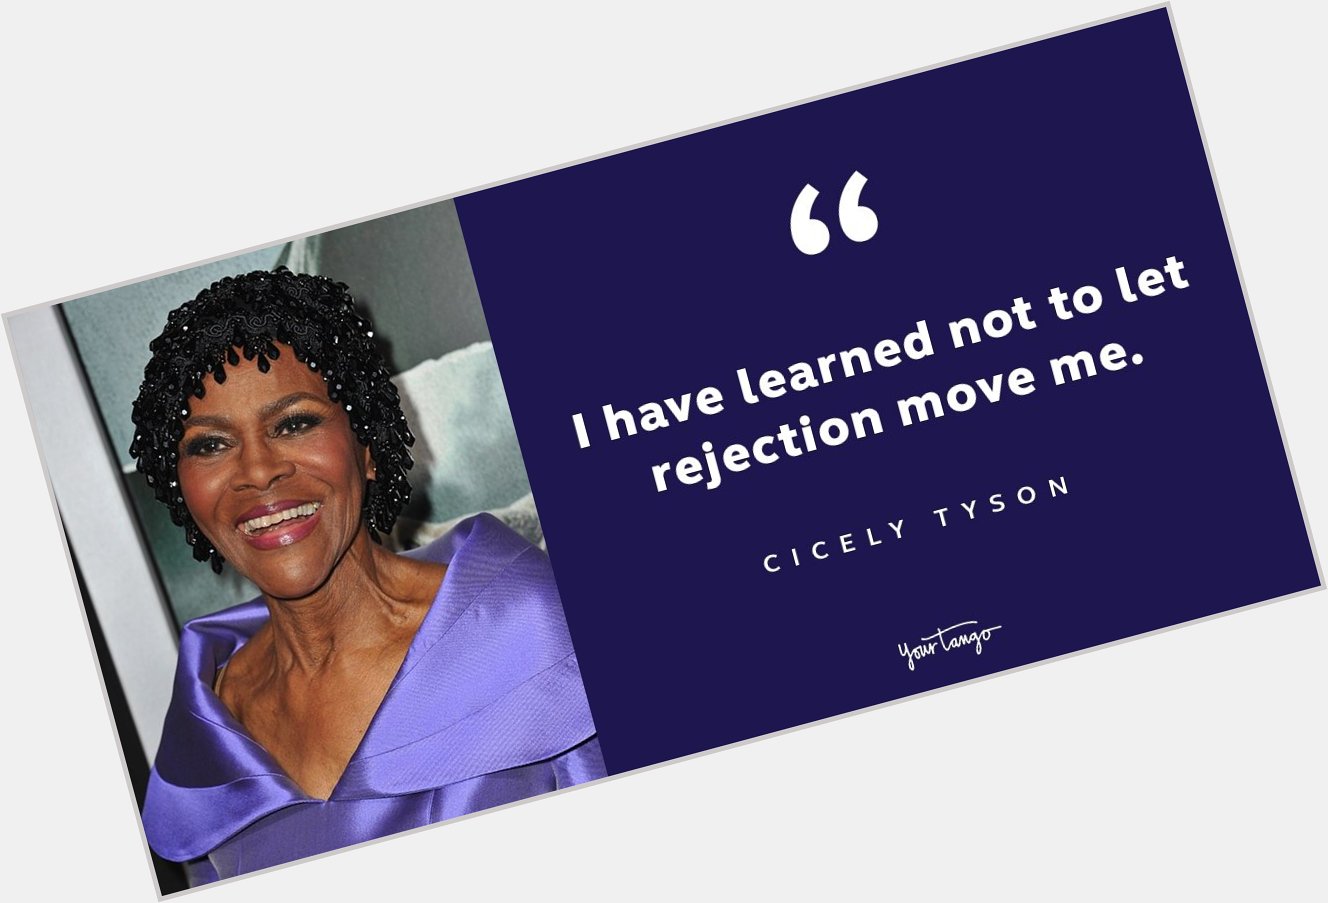 Happy Heavenly Birthday   Ms.Cicely Tyson
Rest In The Heavens  